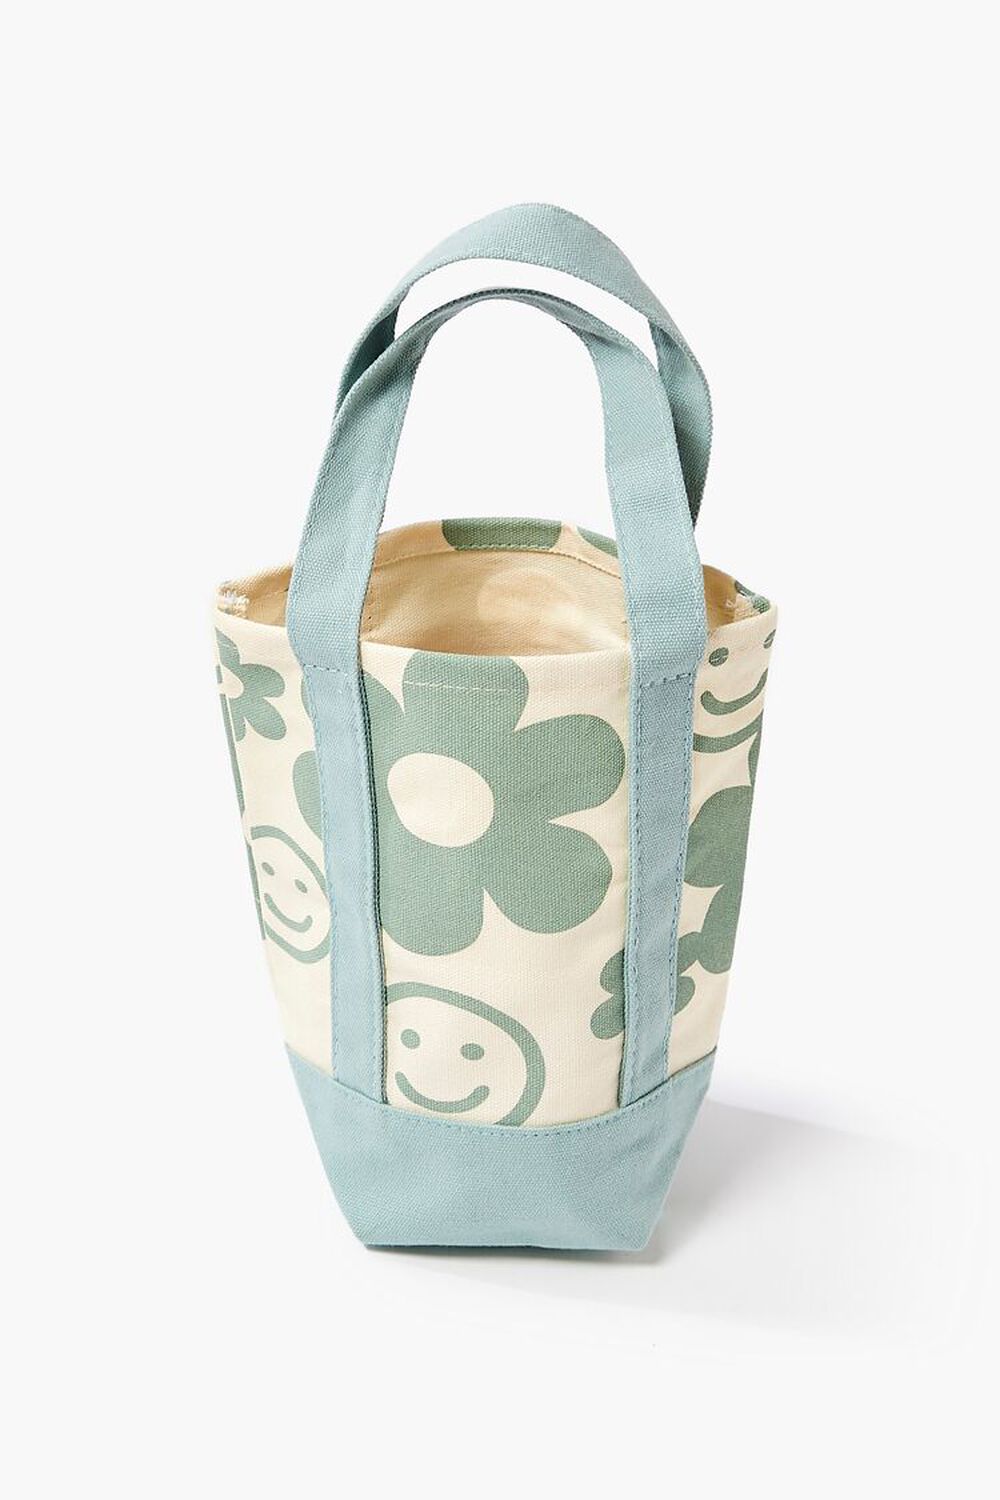 MINT/NATURAL Floral & Happy Face Tote Bag, image 1